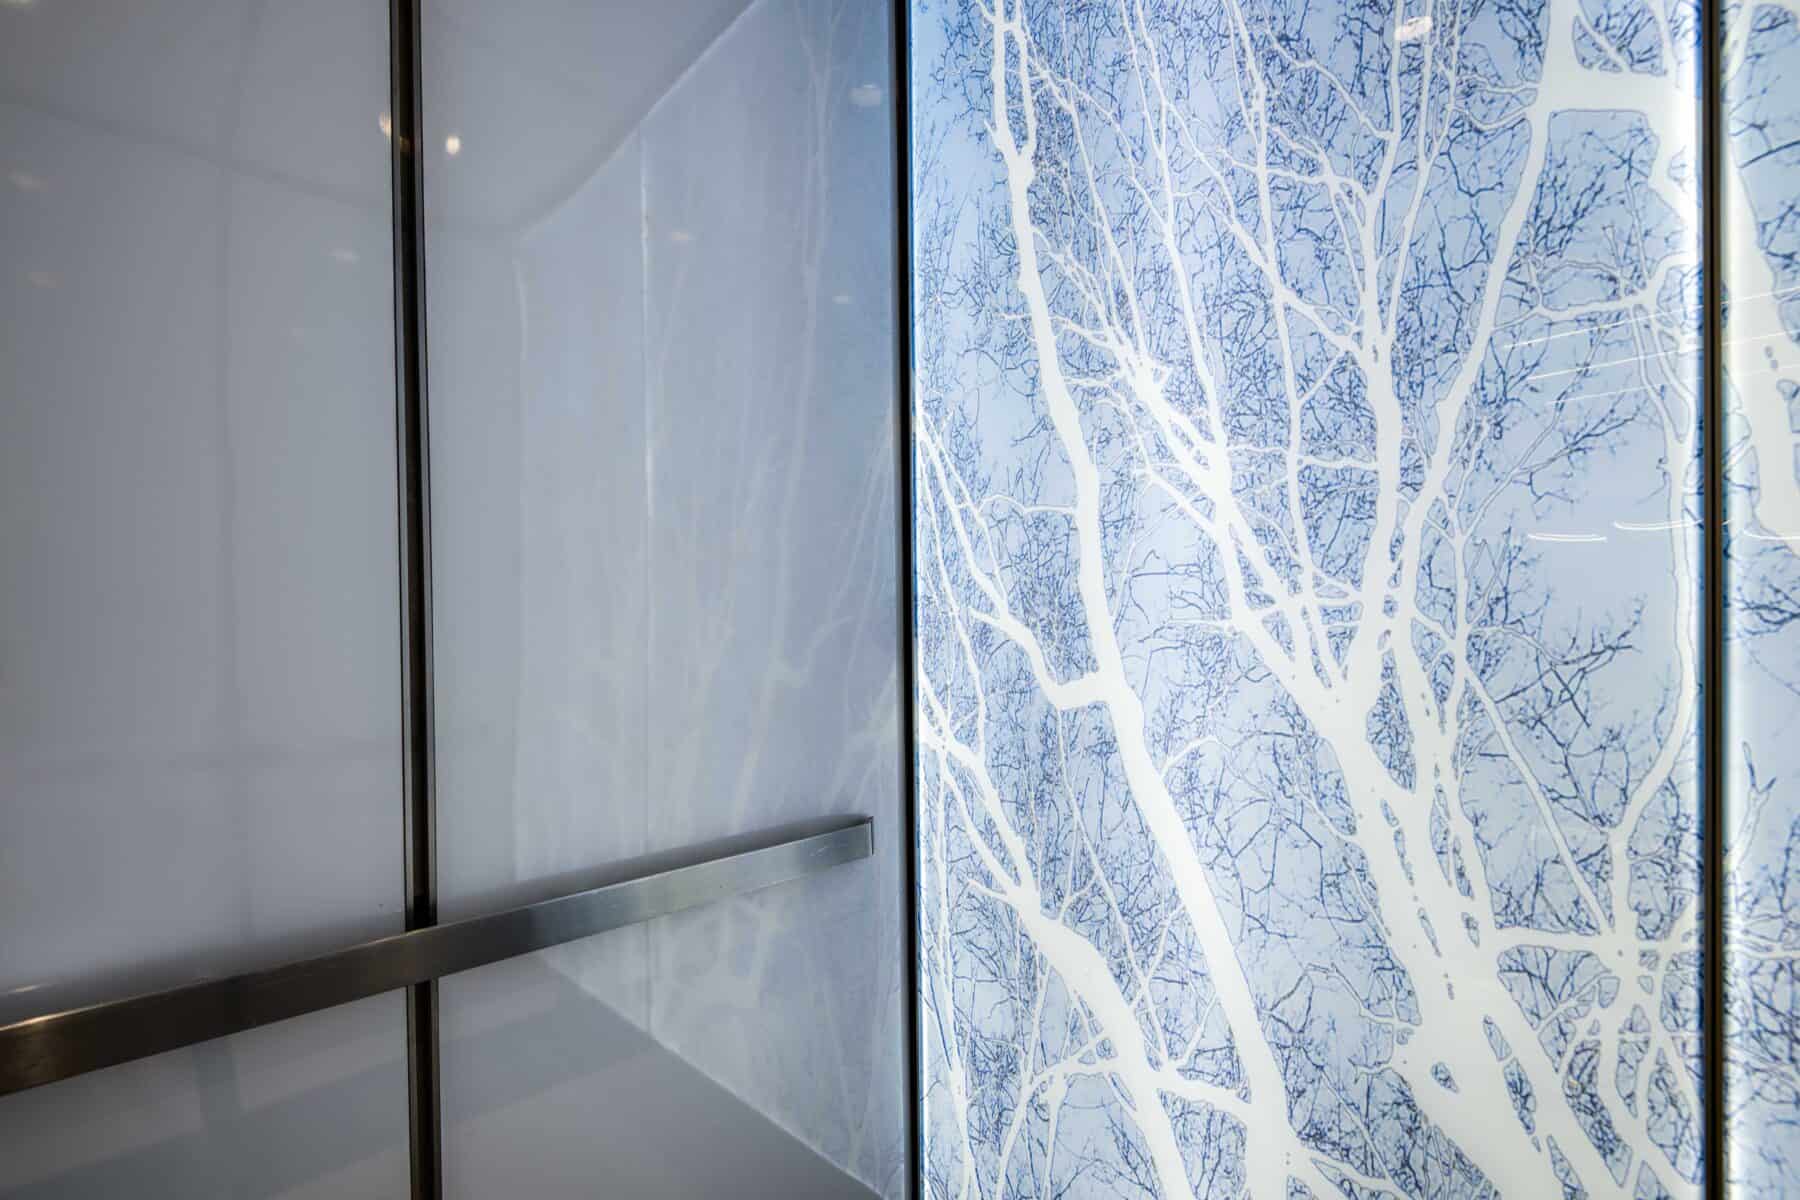 Custom Back Lit Glass Wall Panel with Tree Image by Commercial Builder & General Contractor Structural Enterprises